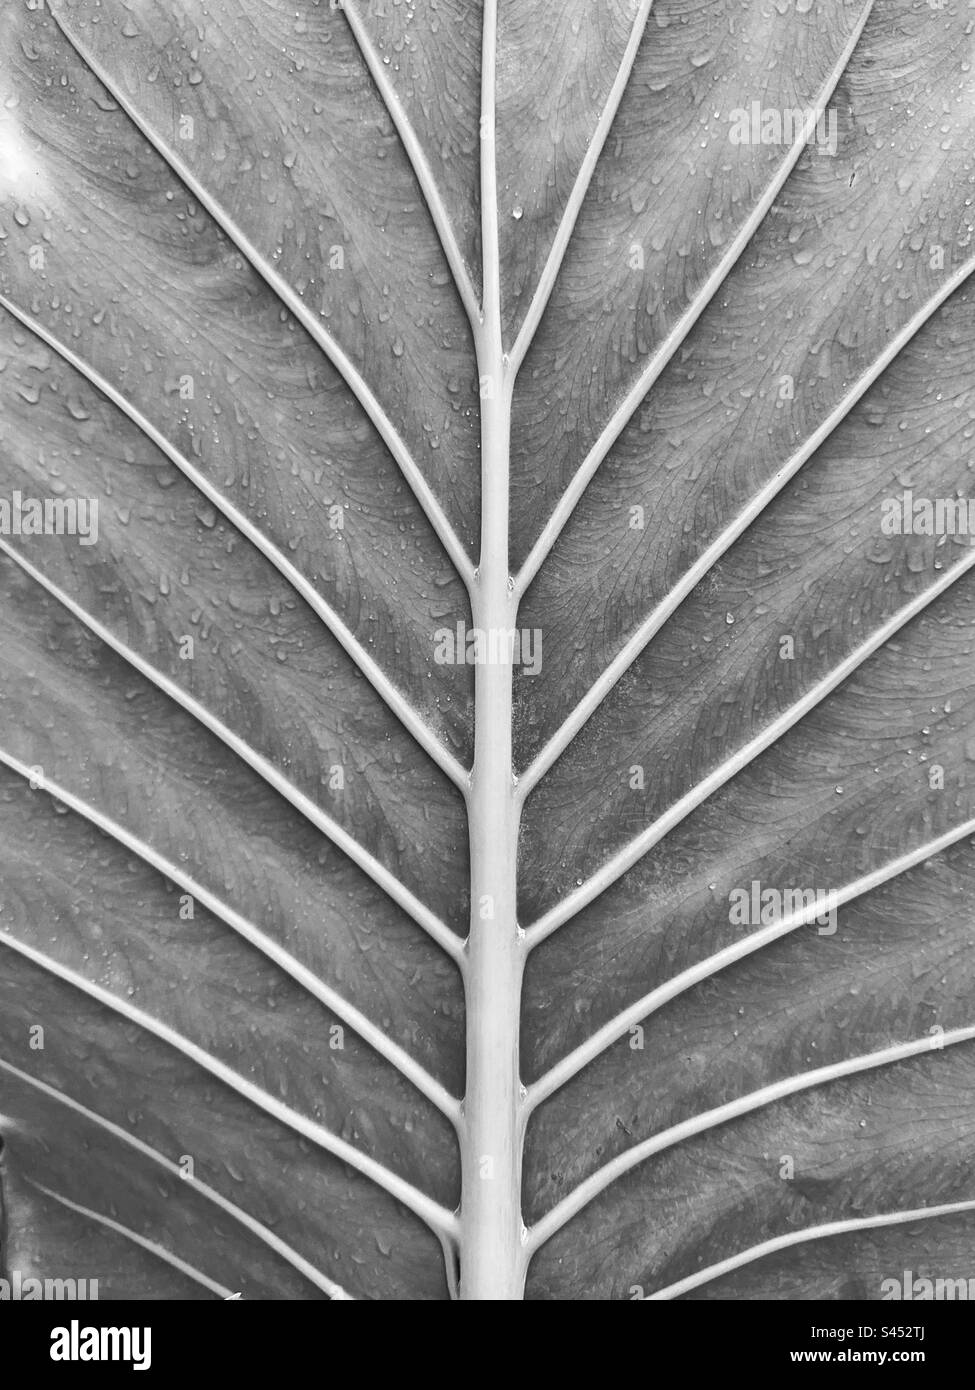 Veins and raindrops  on the leaf of a large tropical plant in black and white. Backgrounds. No people. Stock Photo